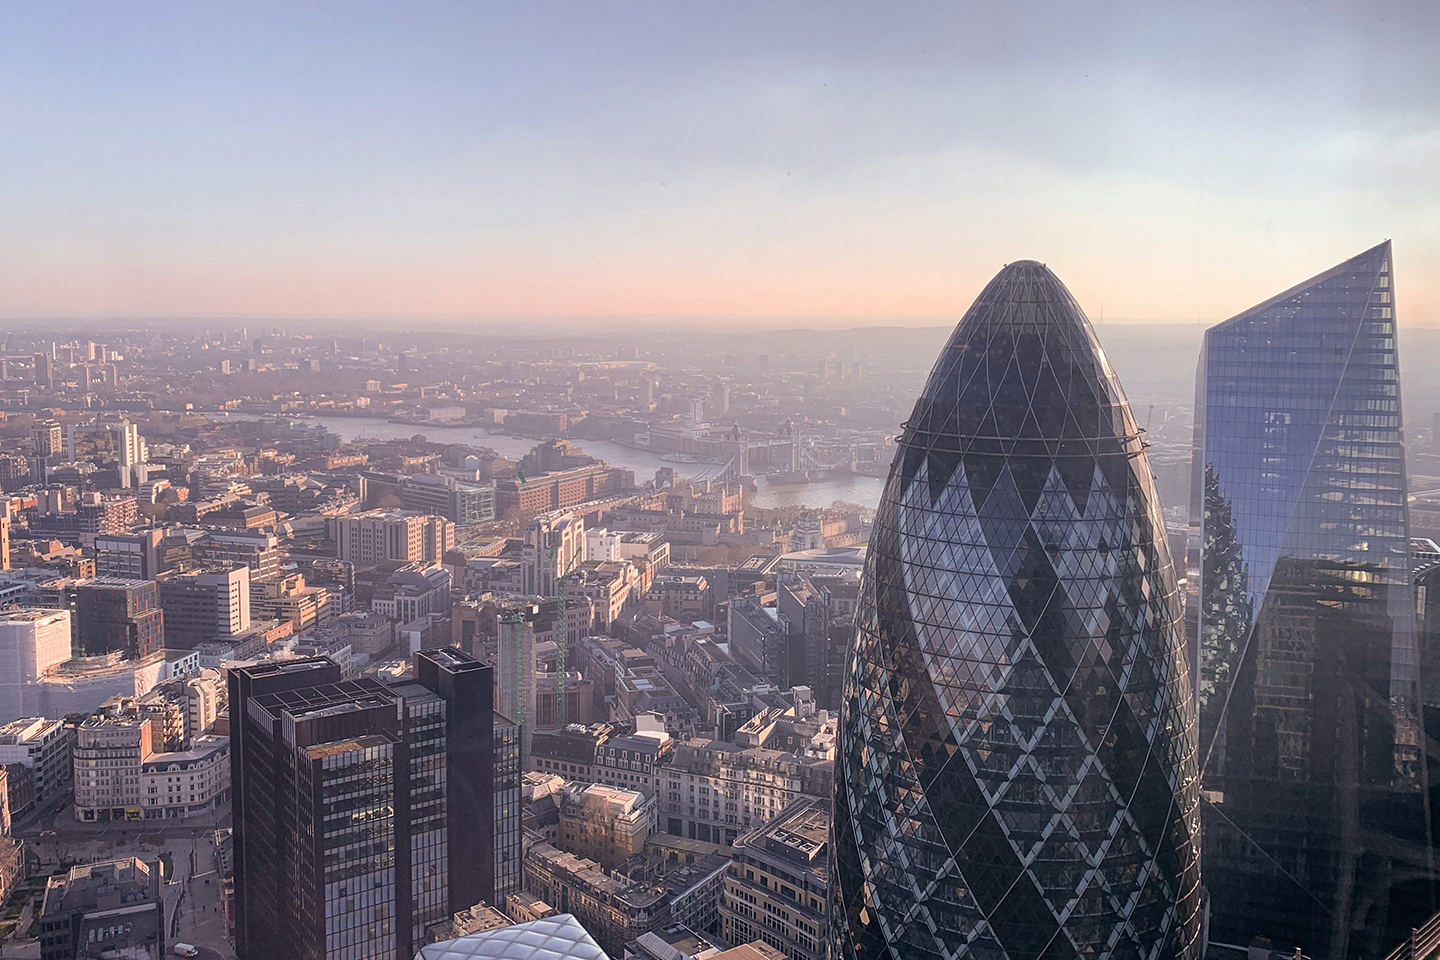 The London cityscape. HMRCs expanding powers in tackling in tackling tax avoidance schemes 